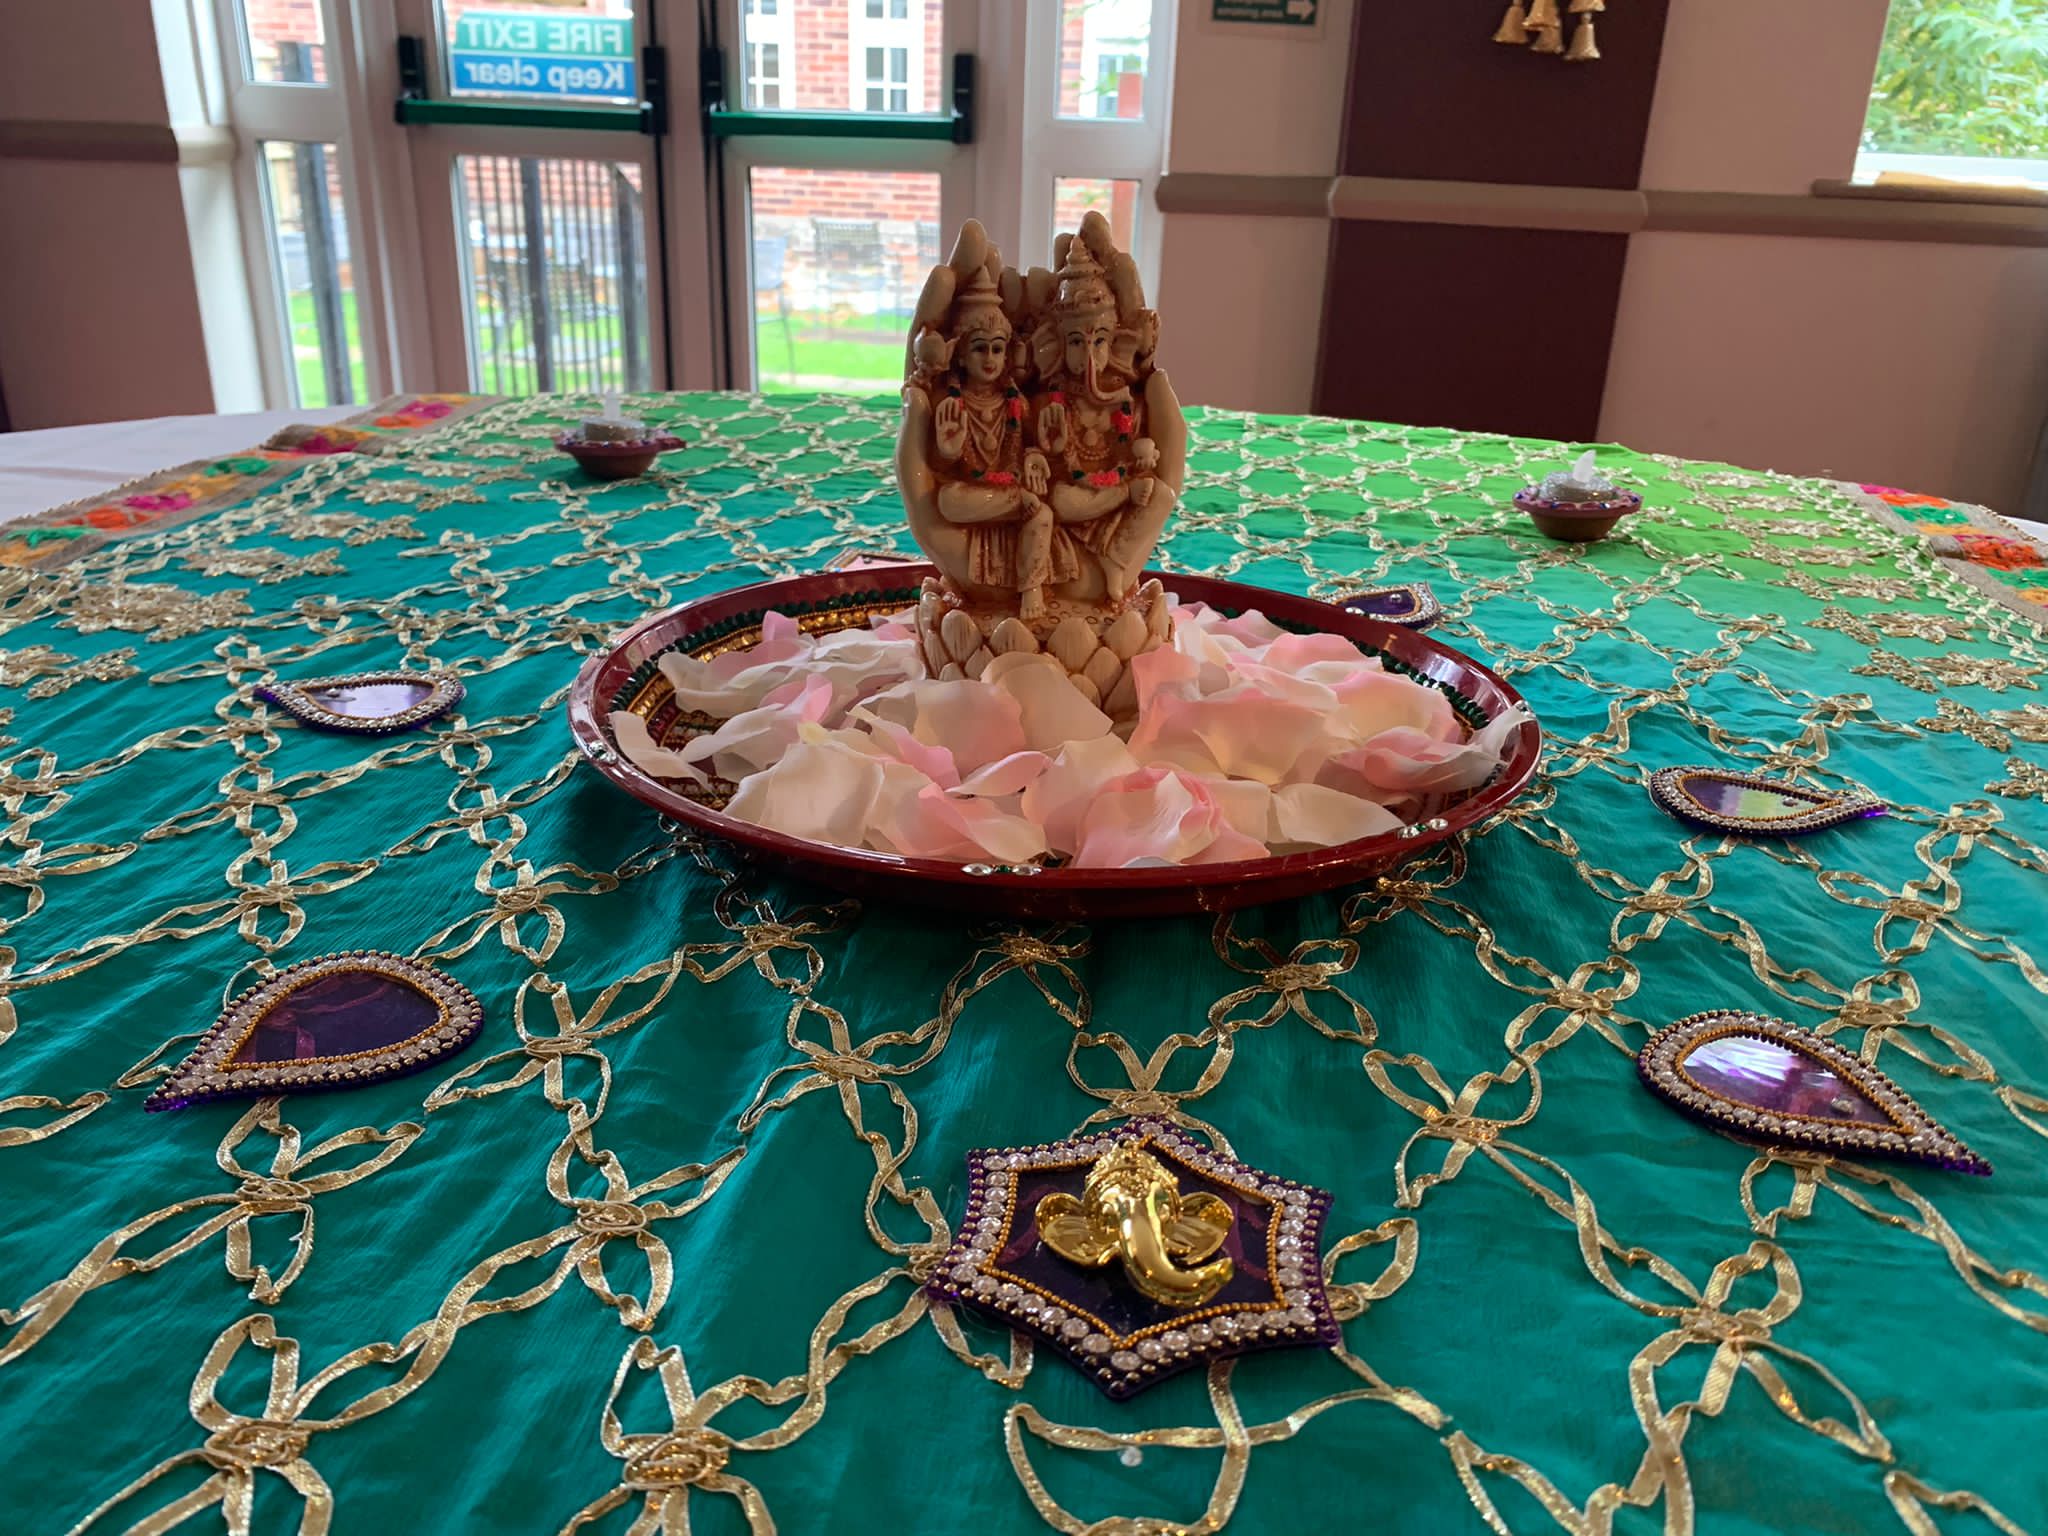 Image shows traditional Diwali decorations on a tables with a Hindi god statue and rose petals.